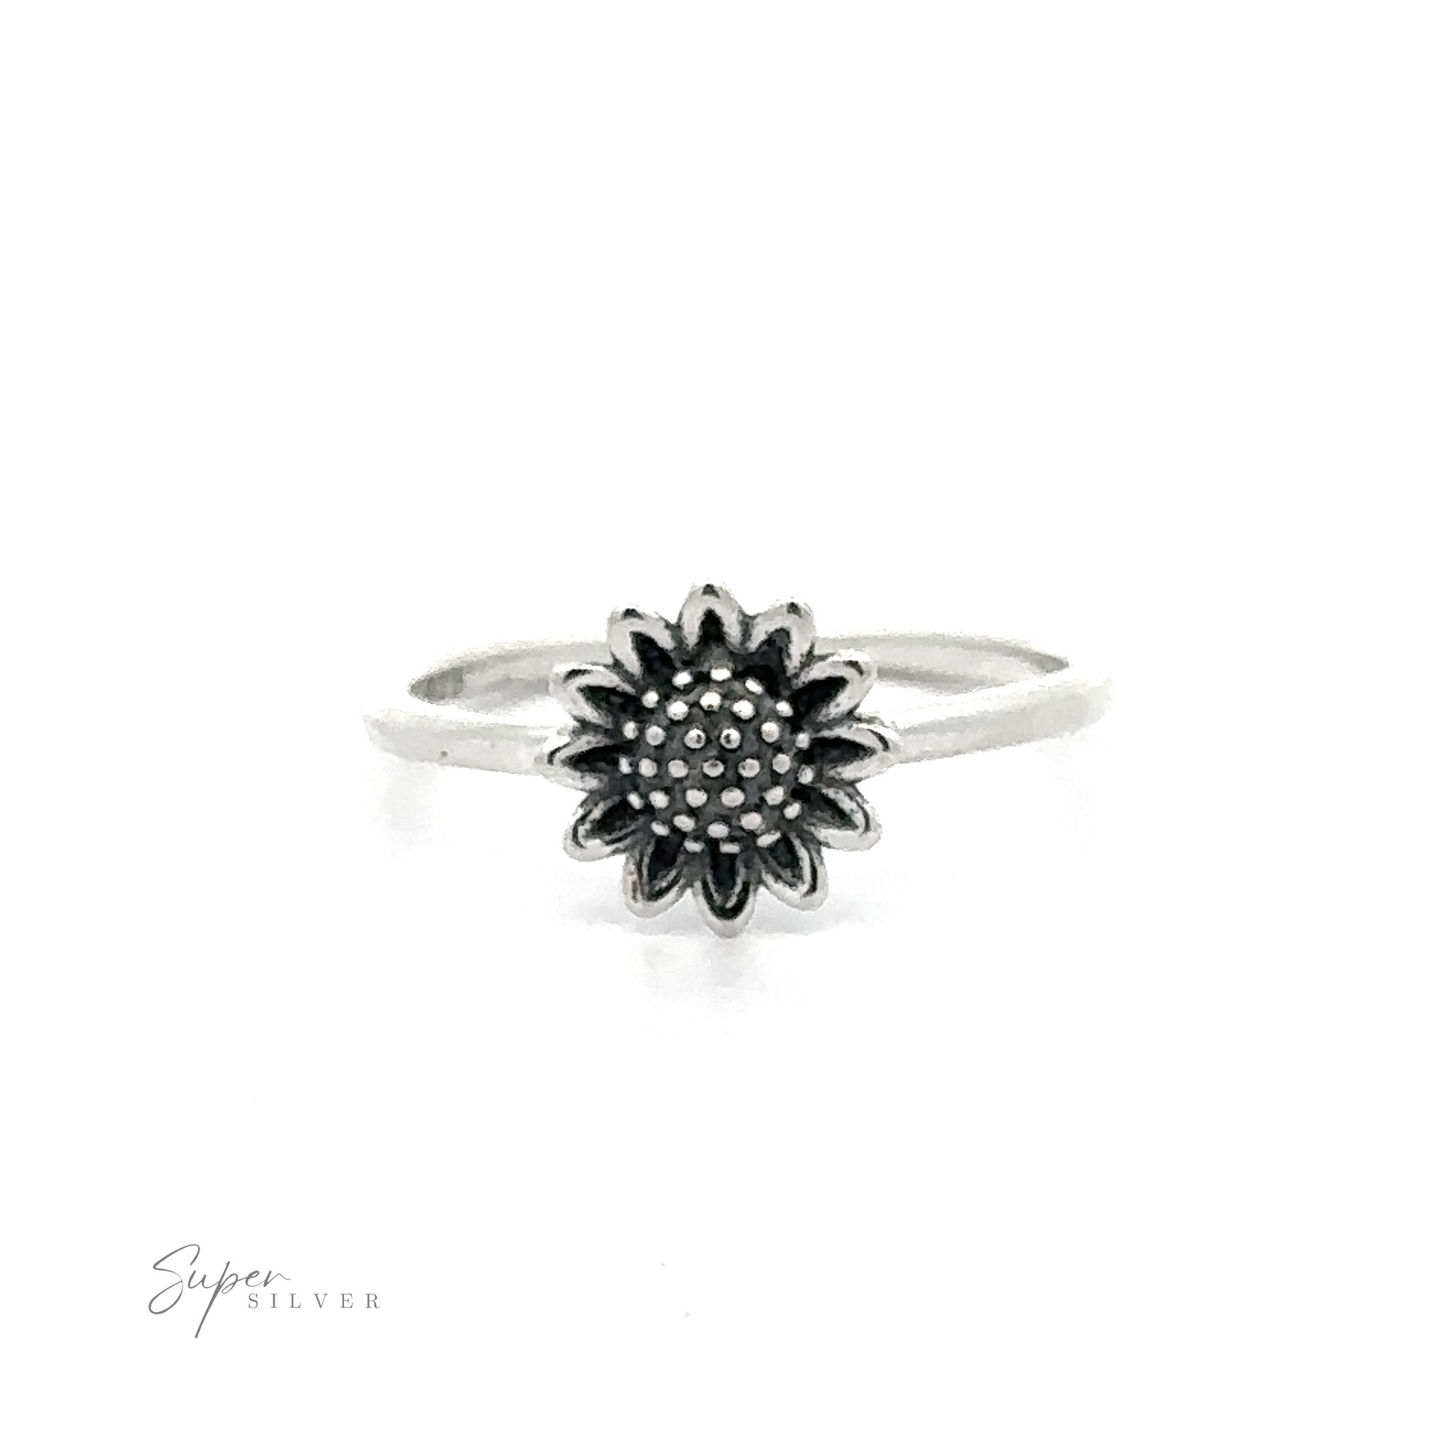 A Sterling Silver Sunflower Ring on a white background.